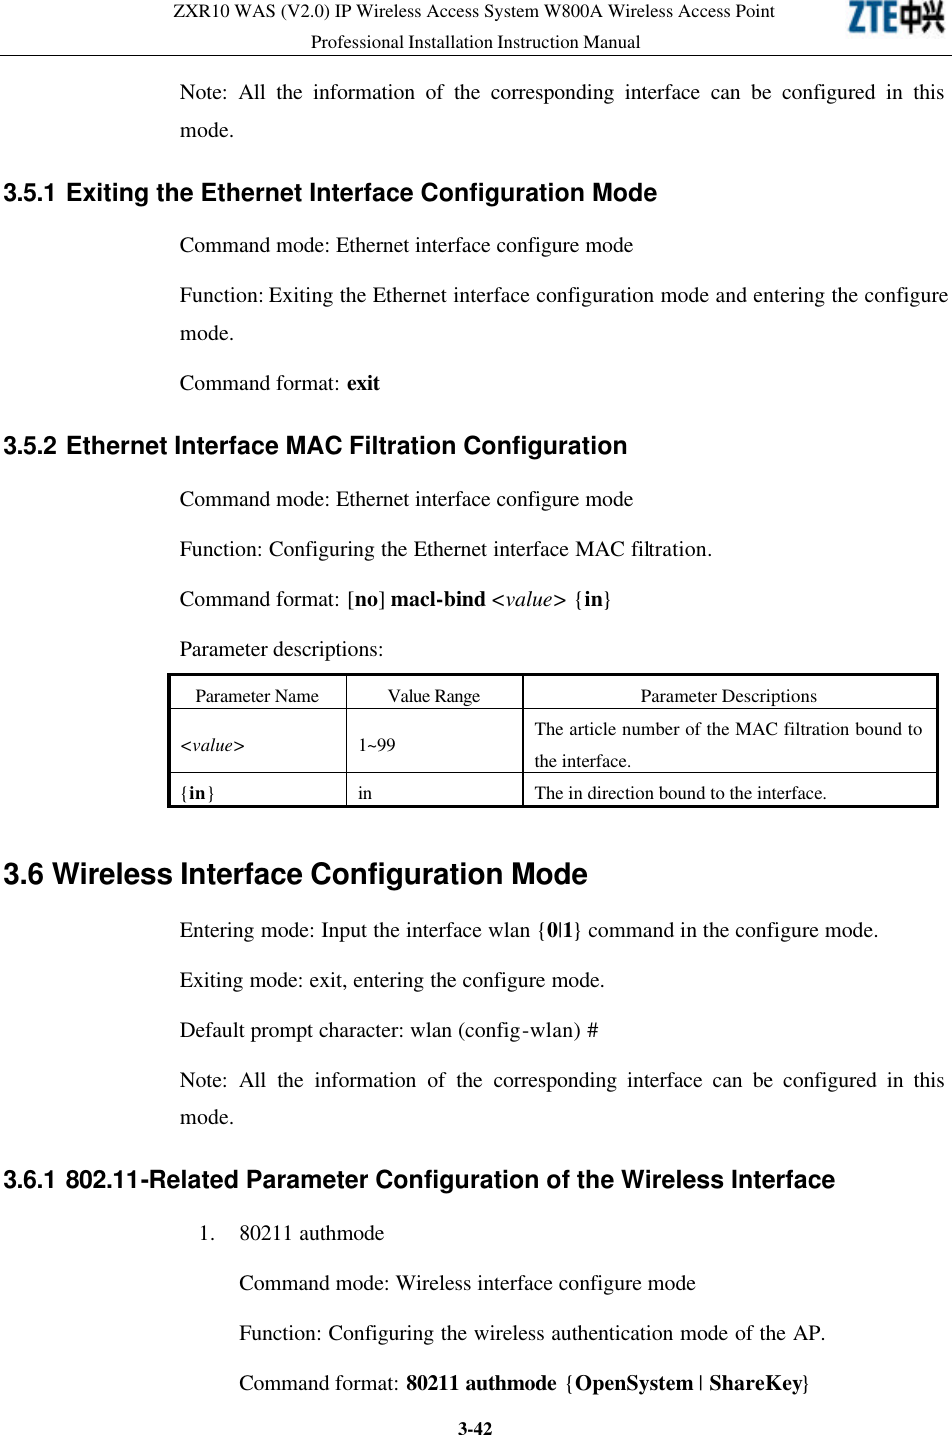 ZXR10 WAS (V2.0) IP Wireless Access System W800A Wireless Access Point Professional Installation Instruction Manual  3-42Note: All the information of the corresponding interface can be configured in this mode.   3.5.1 Exiting the Ethernet Interface Configuration Mode  Command mode: Ethernet interface configure mode   Function: Exiting the Ethernet interface configuration mode and entering the configure mode.   Command format: exit 3.5.2 Ethernet Interface MAC Filtration Configuration  Command mode: Ethernet interface configure mode   Function: Configuring the Ethernet interface MAC filtration.   Command format: [no] macl-bind &lt;value&gt; {in} Parameter descriptions:   Parameter Name Value Range Parameter Descriptions &lt;value&gt; 1~99 The article number of the MAC filtration bound to the interface.   {in} in The in direction bound to the interface.   3.6 Wireless Interface Configuration Mode  Entering mode: Input the interface wlan {0|1} command in the configure mode.   Exiting mode: exit, entering the configure mode.   Default prompt character: wlan (config-wlan) # Note: All the information of the corresponding interface can be configured in this mode.   3.6.1 802.11-Related Parameter Configuration of the Wireless Interface  1. 80211 authmode Command mode: Wireless interface configure mode   Function: Configuring the wireless authentication mode of the AP.   Command format: 80211 authmode {OpenSystem | ShareKey} 